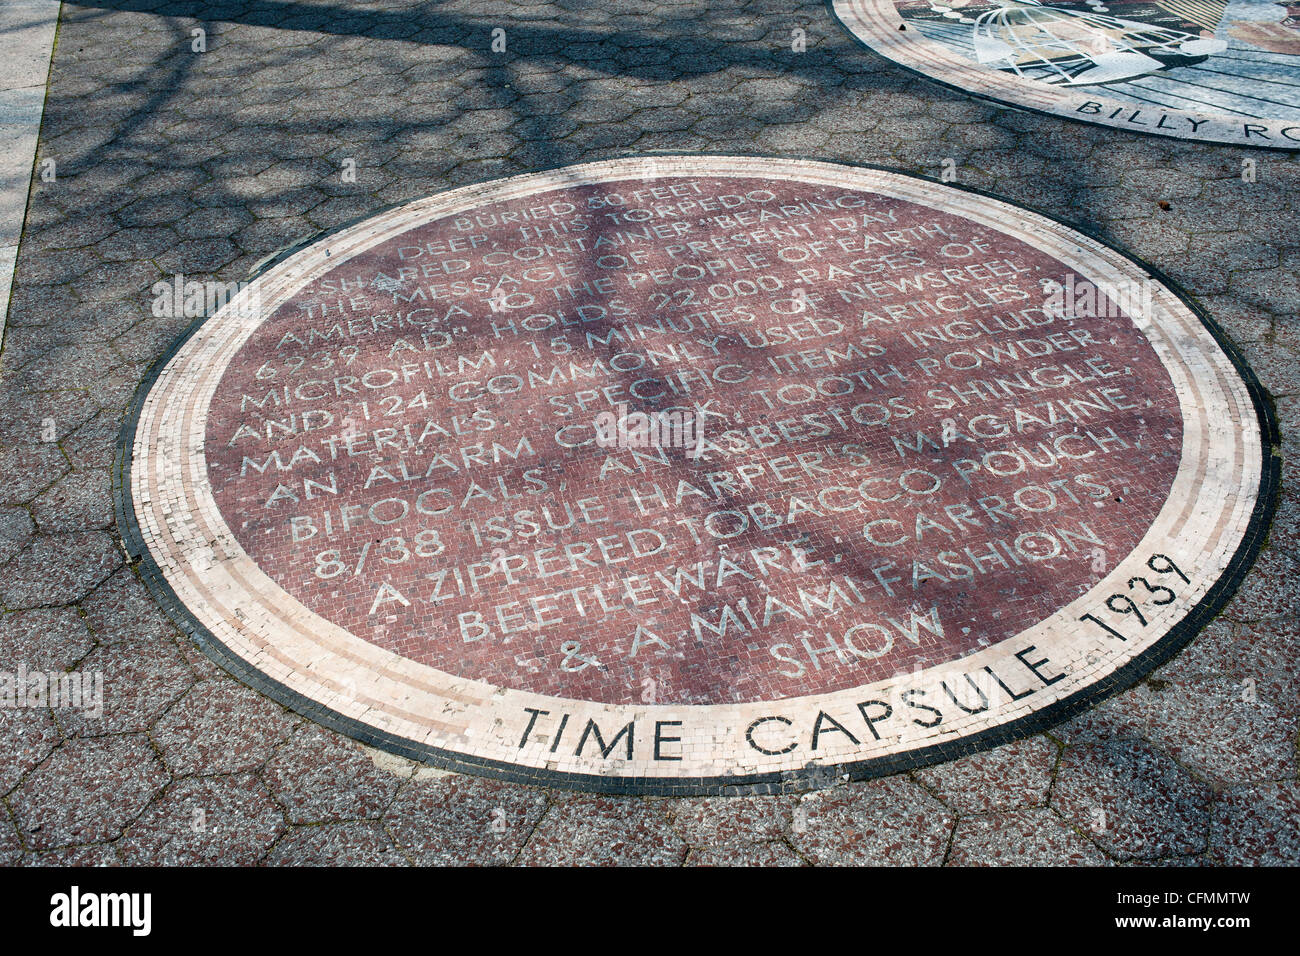 A mosaic in Flushing Meadows park in Queens in New York commemorates the World's Fair time capsule Stock Photo